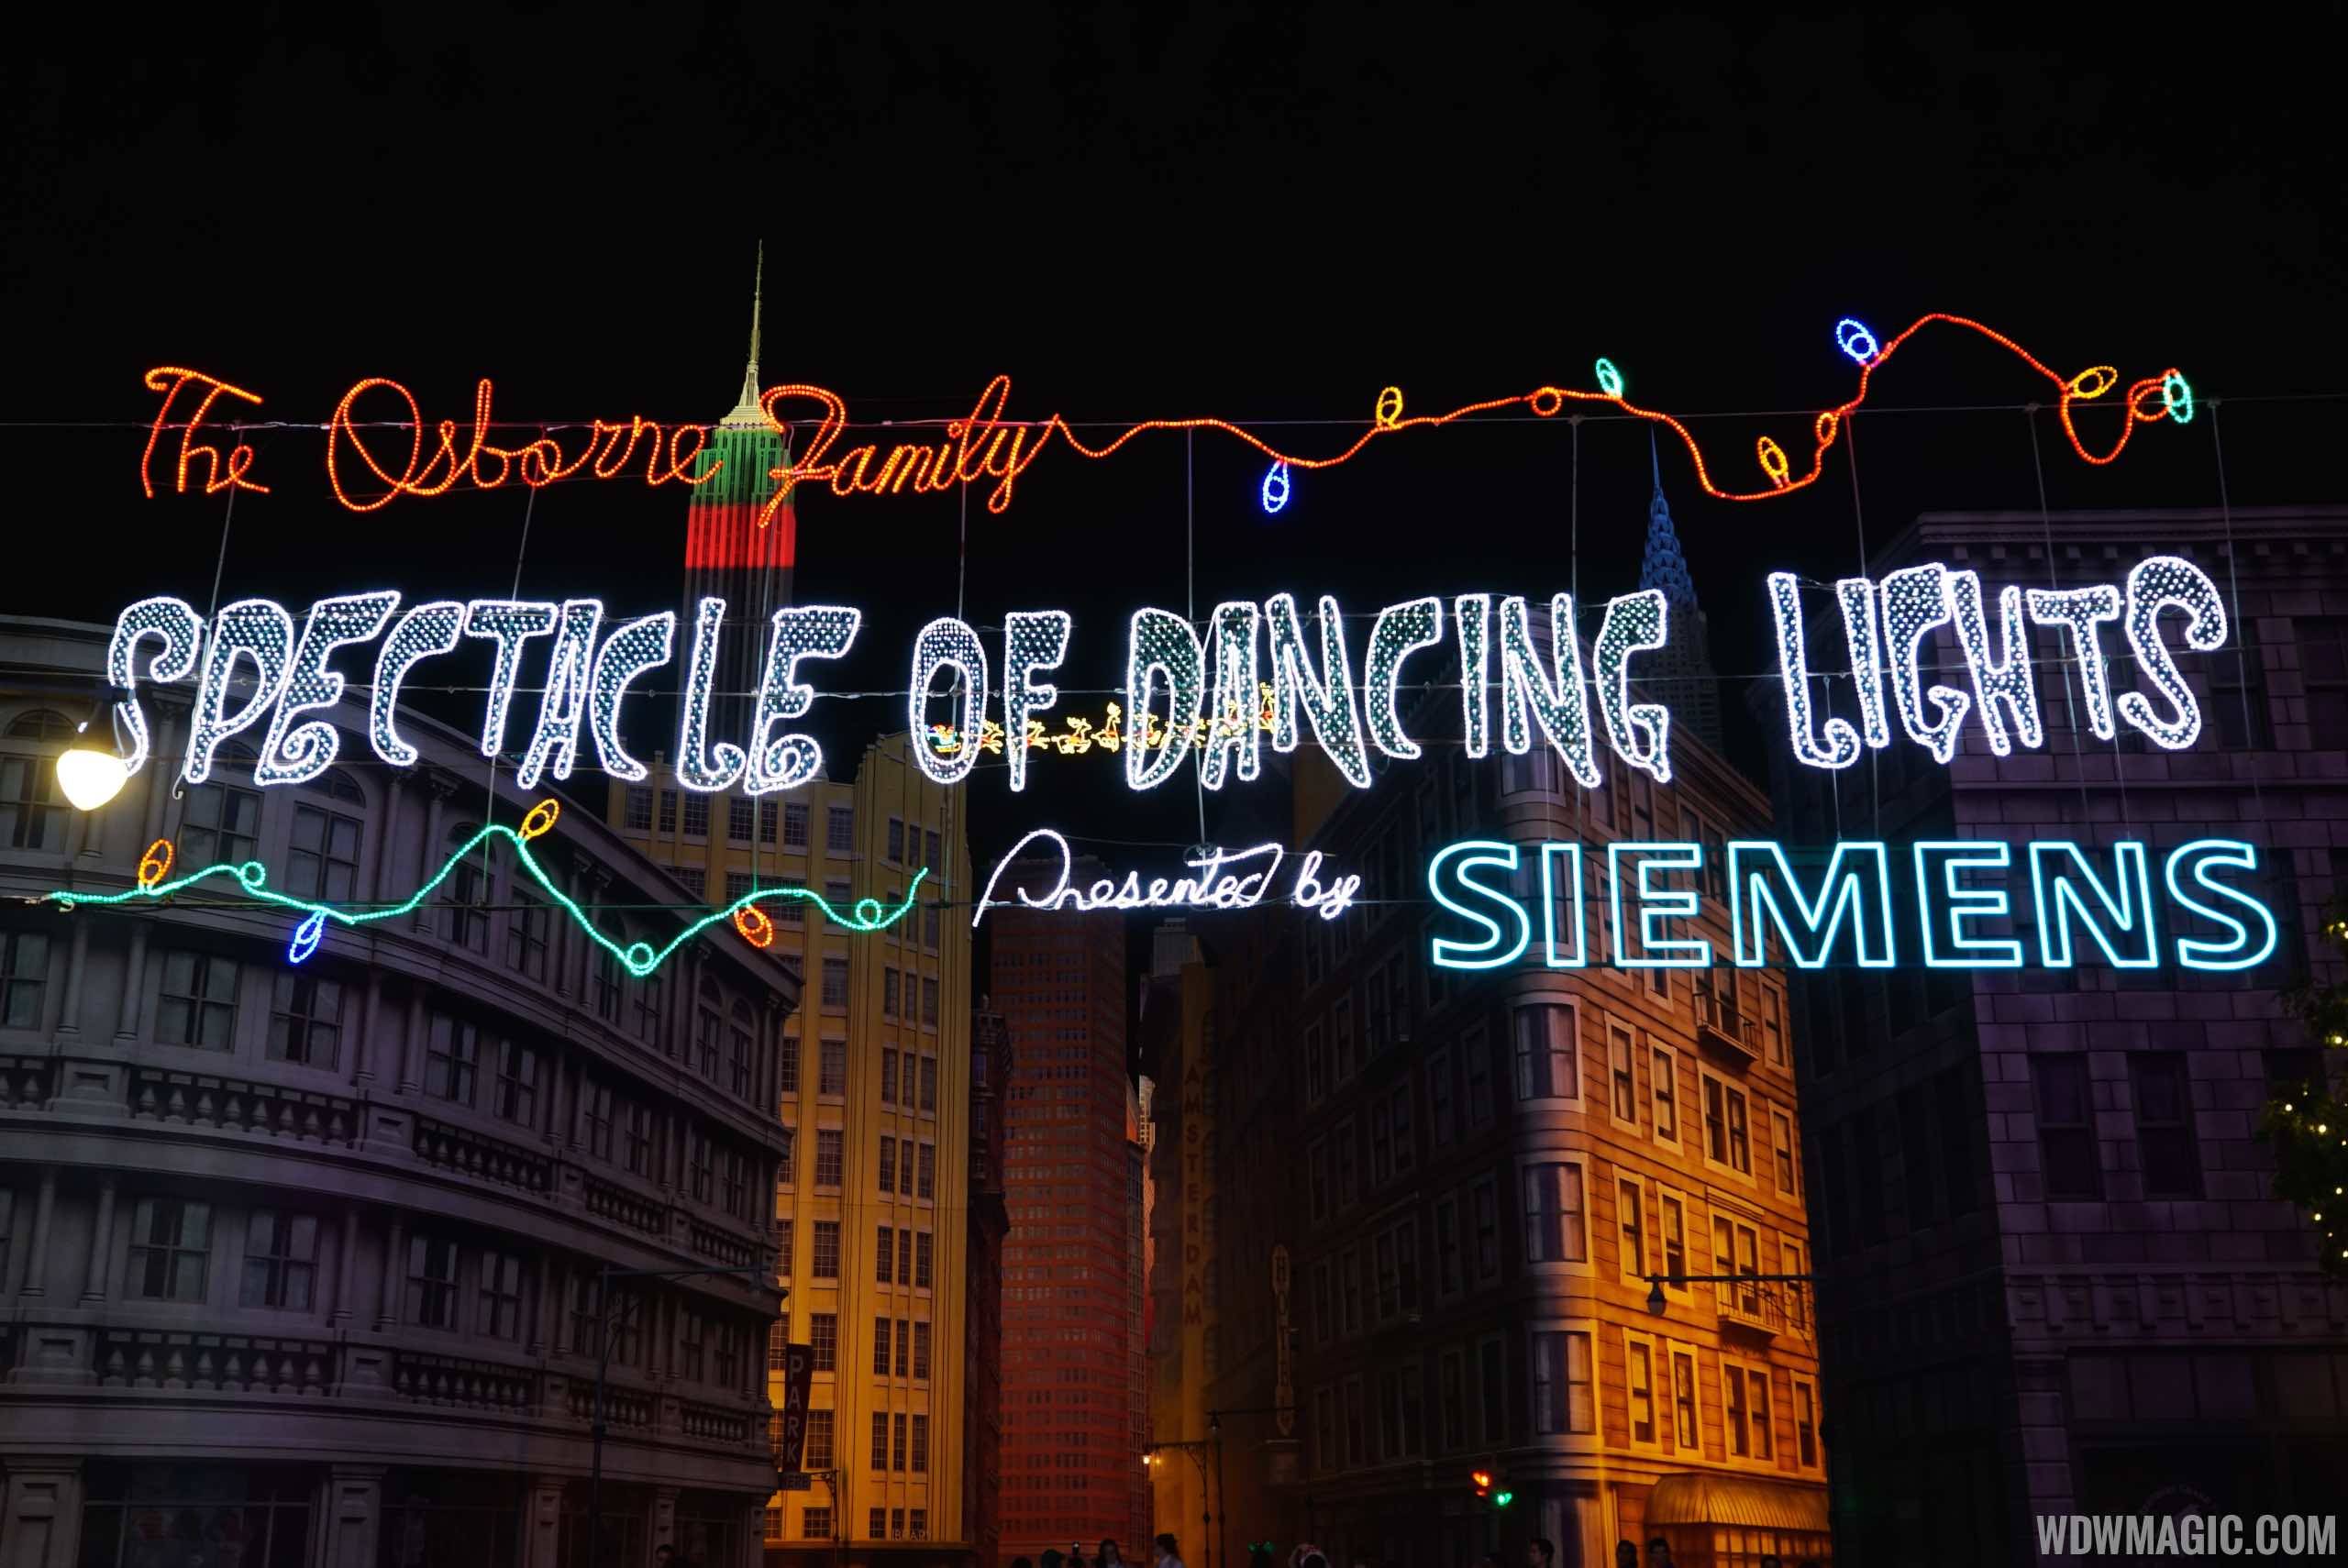 VIDEO - Two new tracks debut for 2011 at the Osborne Family Spectacle of Dancing Lights